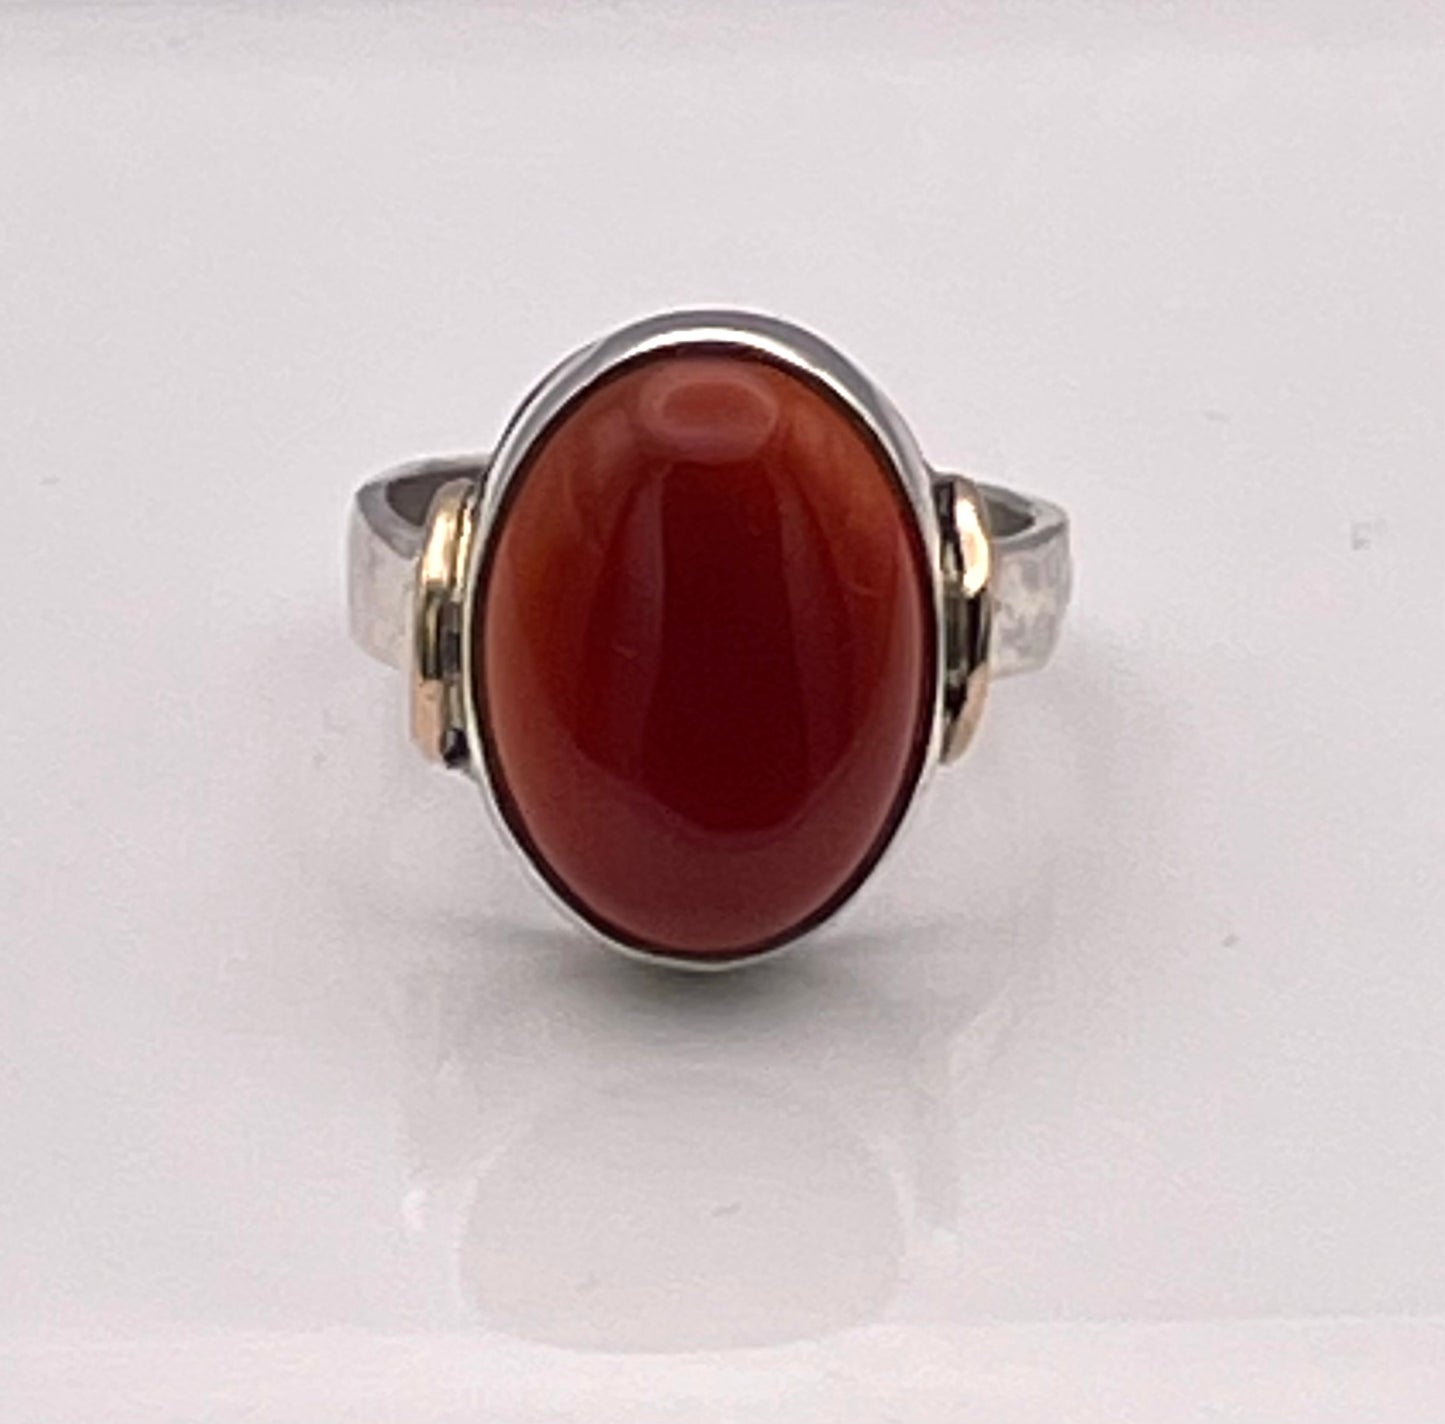 Handmade Carnelian, silver ring with gold finishes